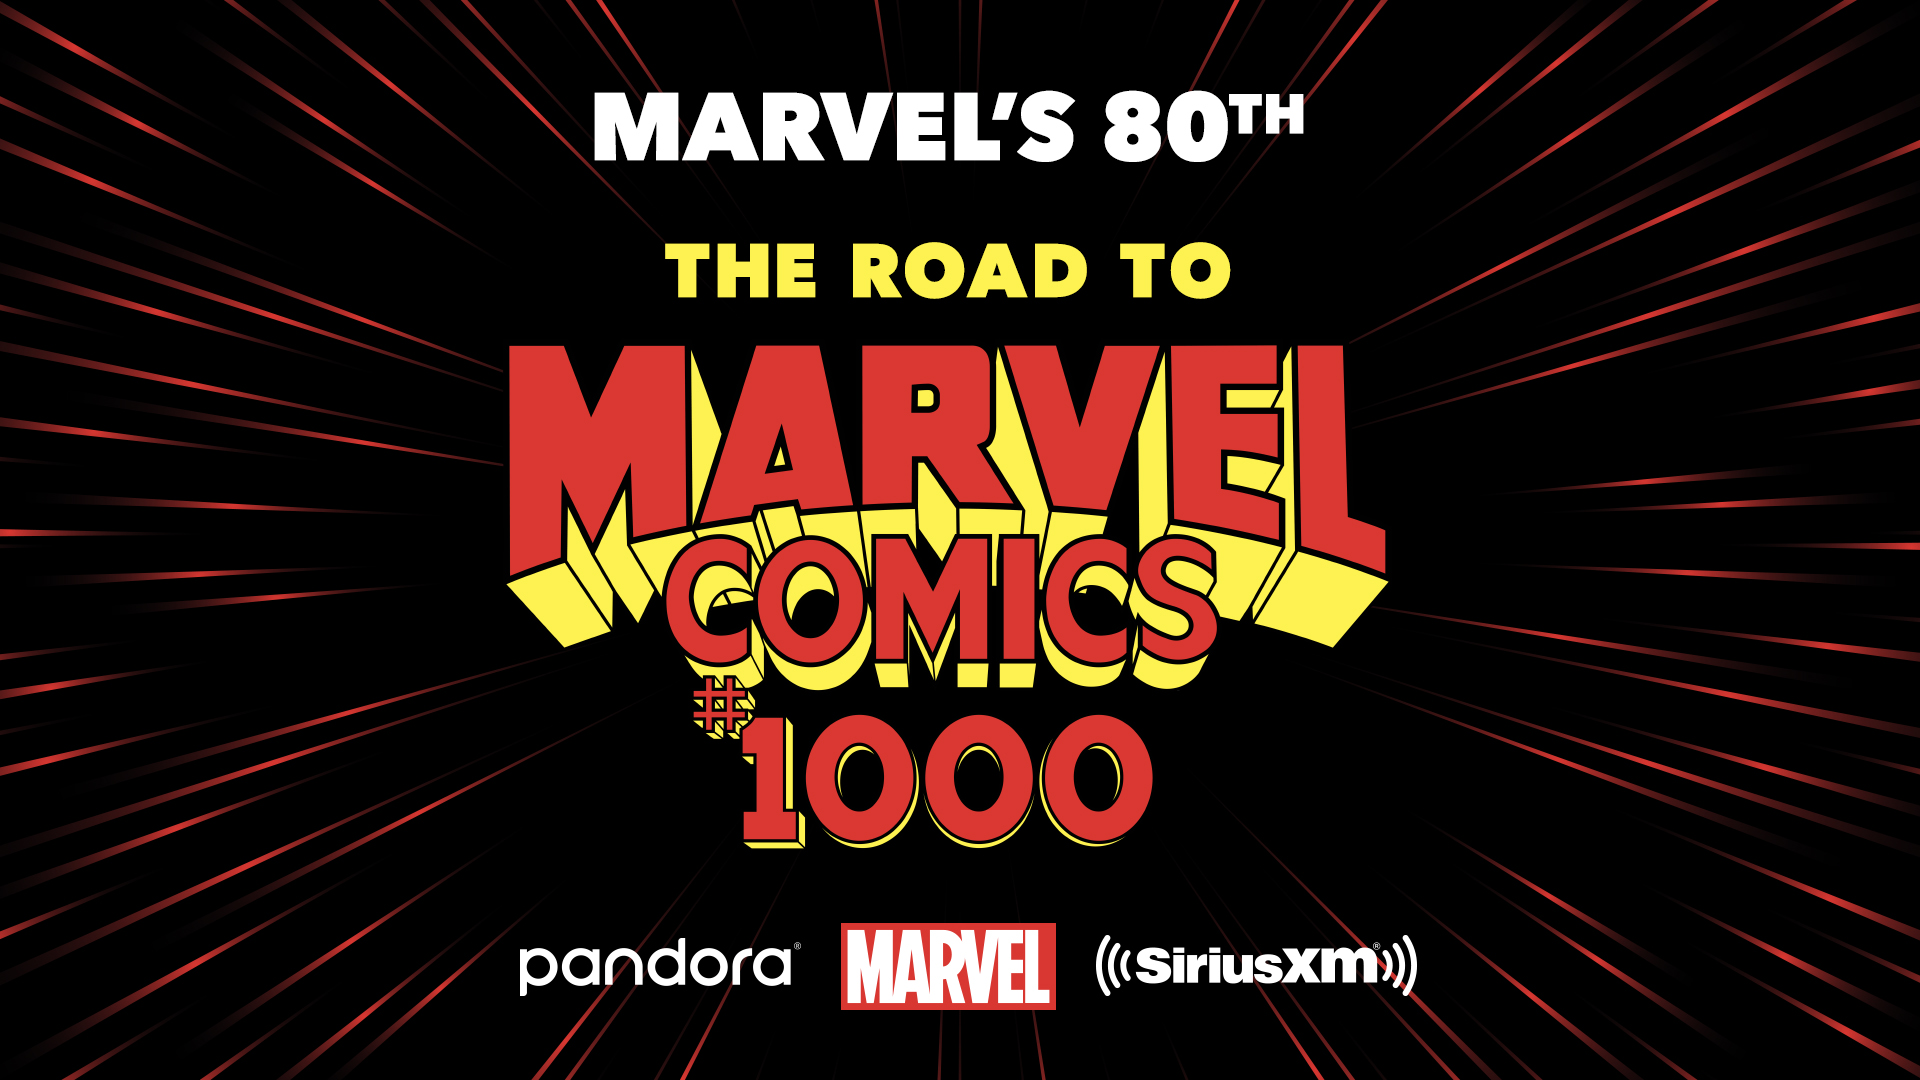 Marvel's 80th: The Road to Marvel Comics #1000